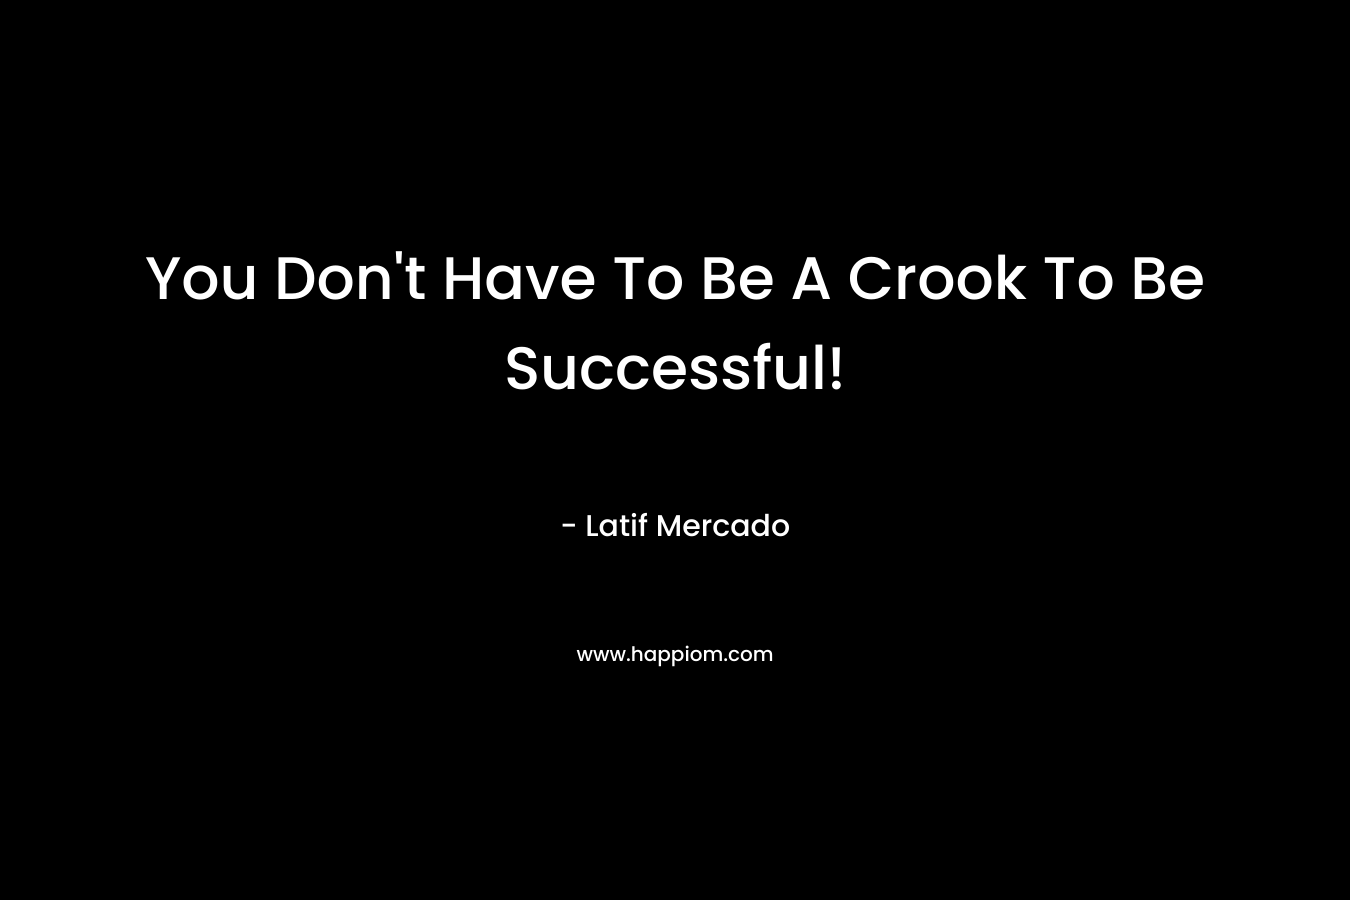 You Don’t Have To Be A Crook To Be Successful! – Latif Mercado